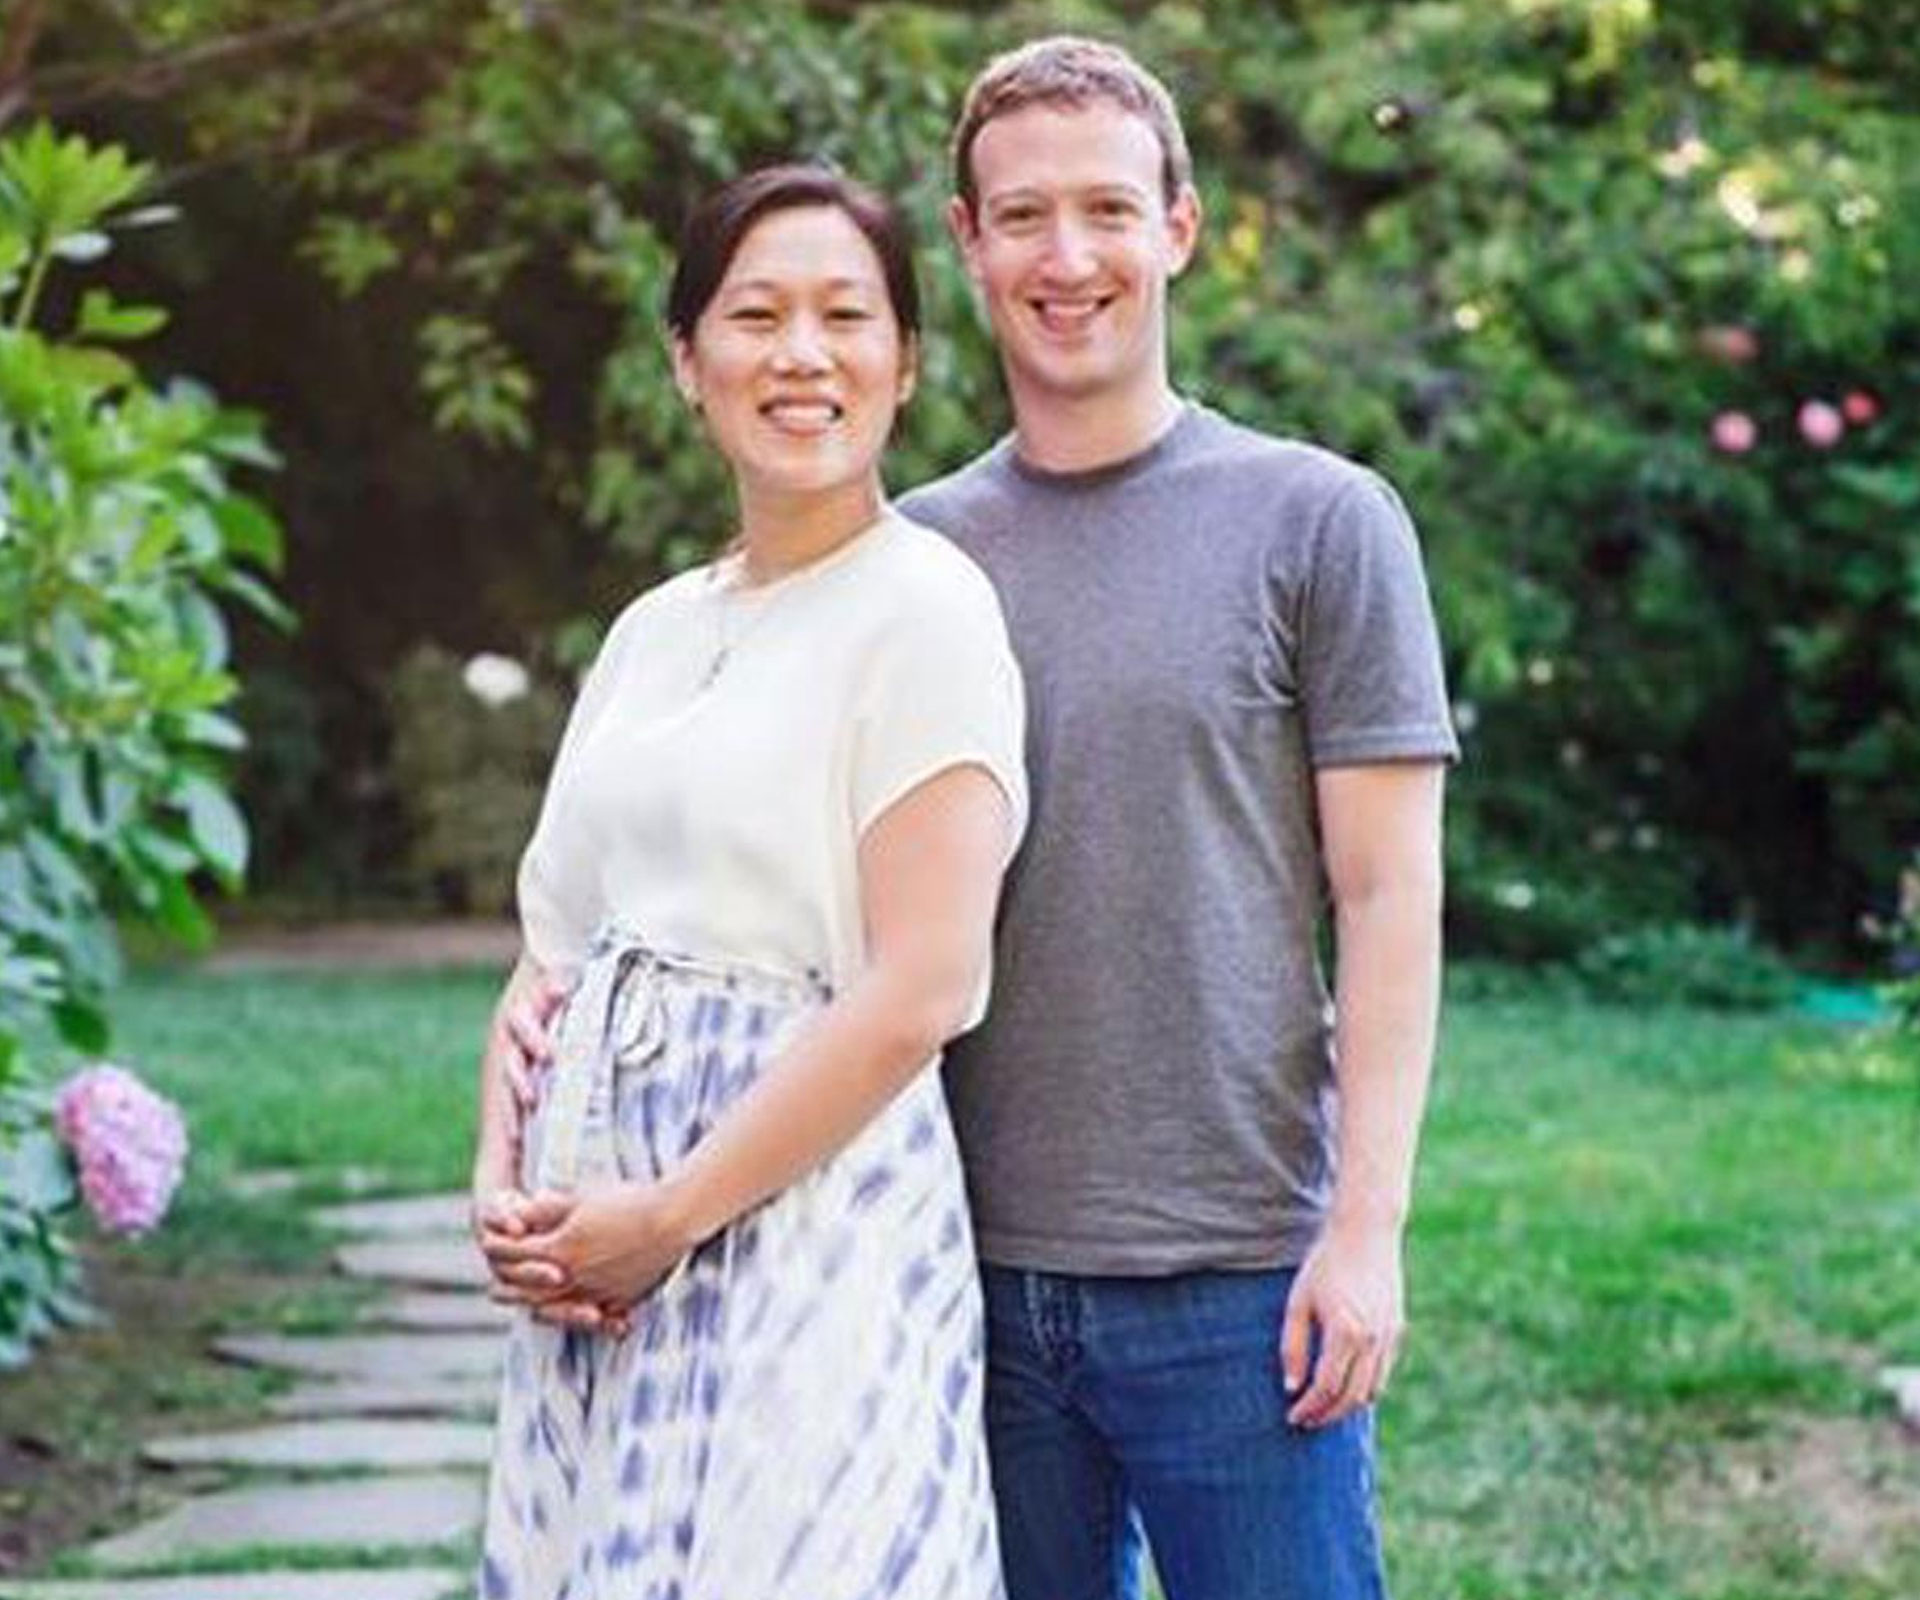 Mark Zuckerberg to take 2 months paternity leave